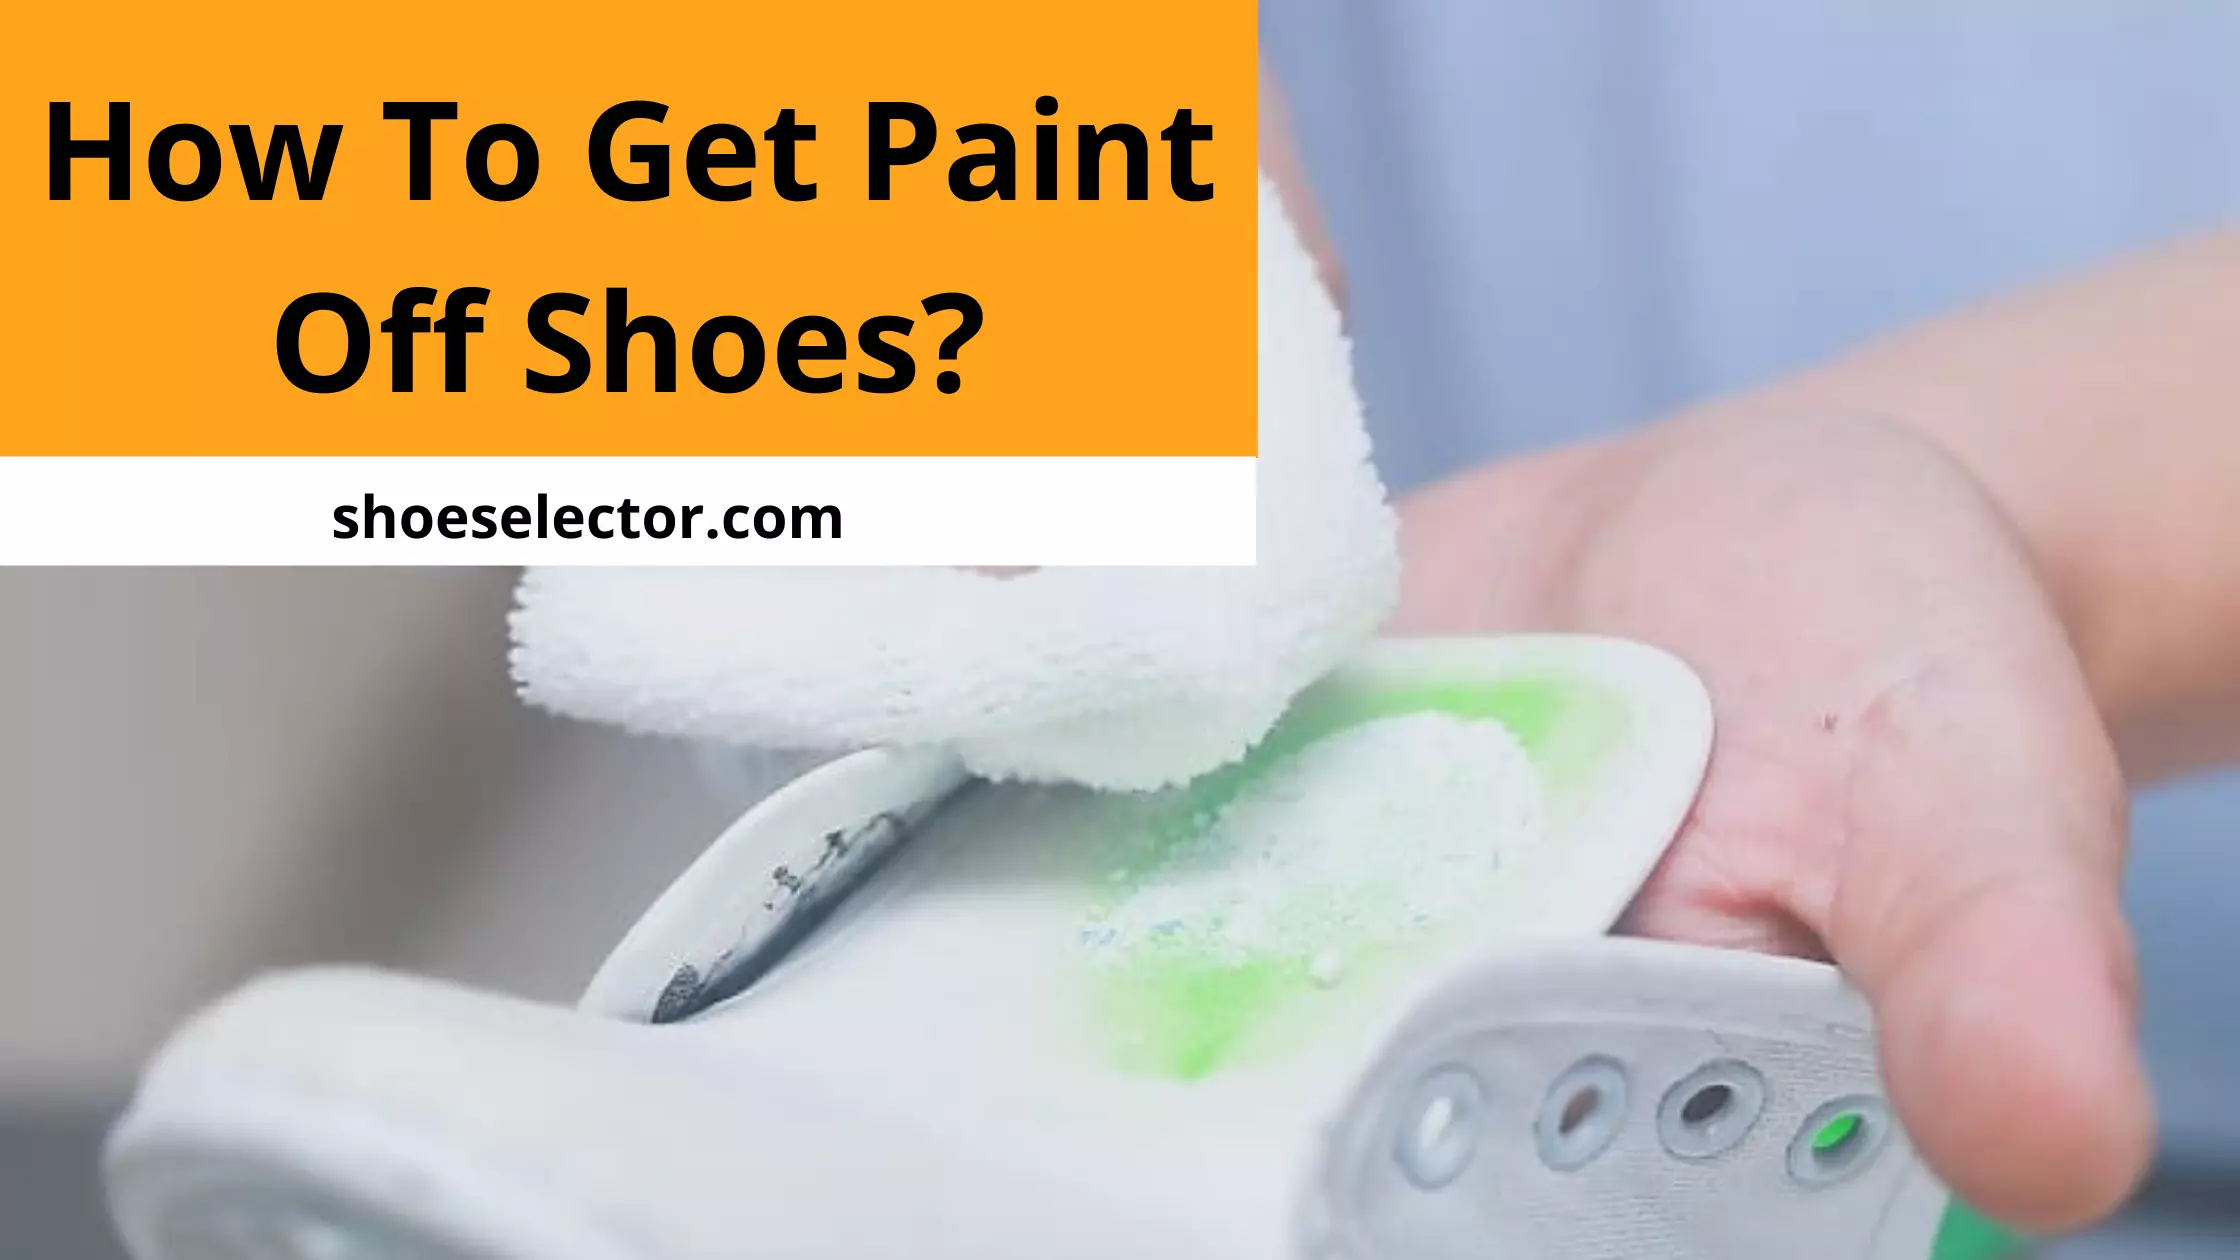 How To Get Paint Off Shoes? - Brief Guide